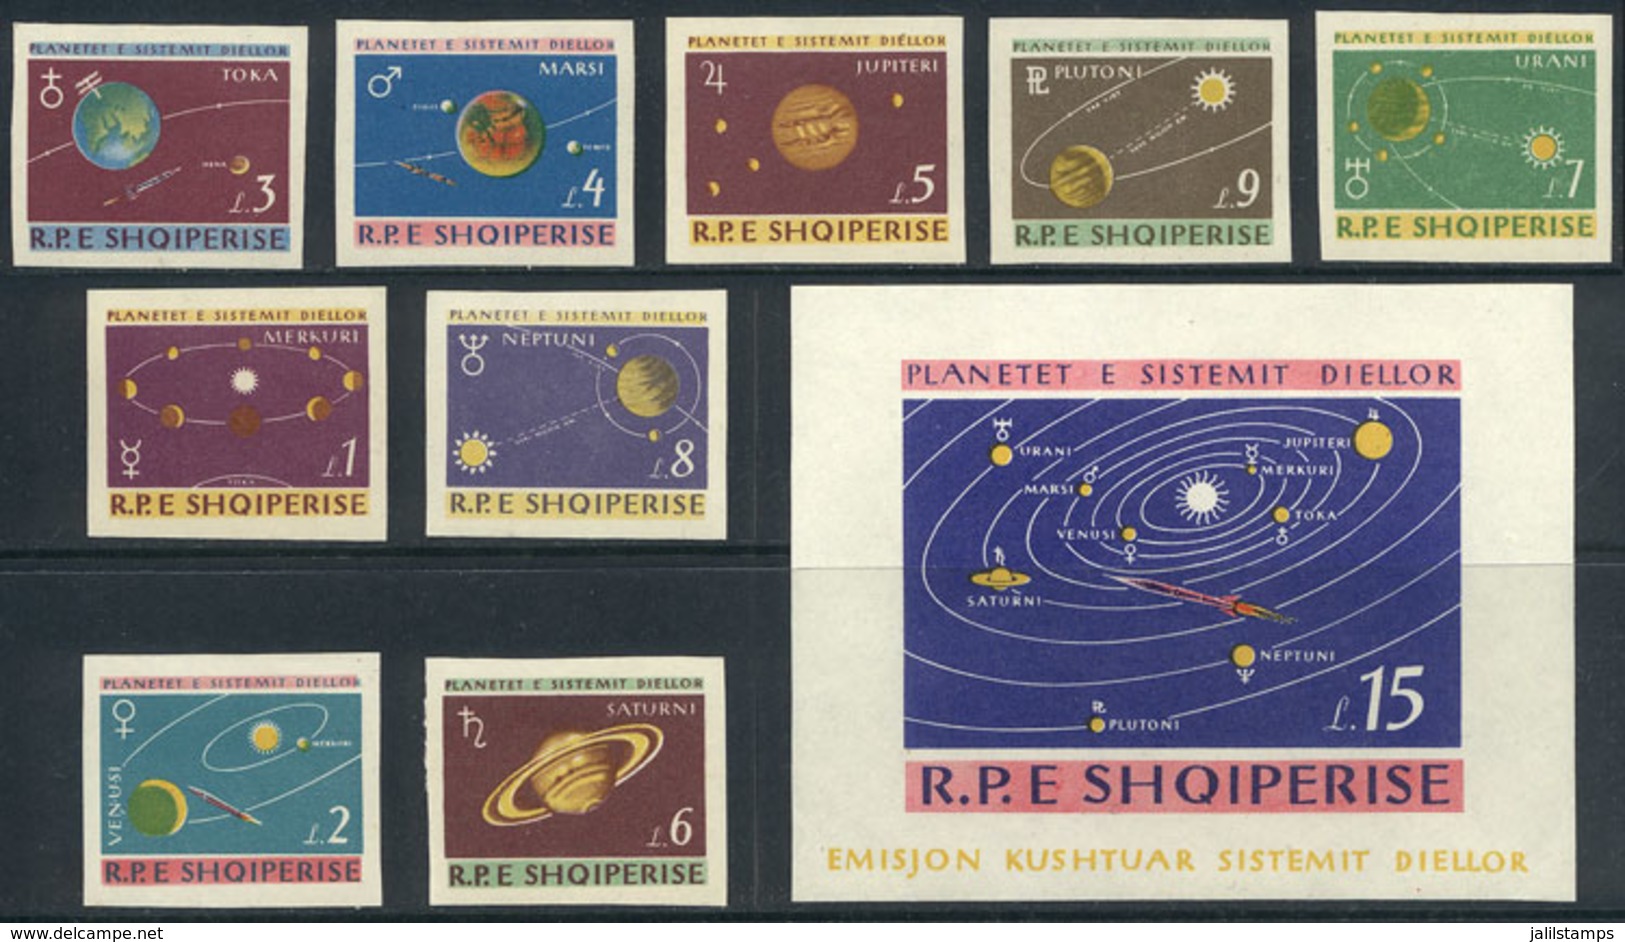 ALBANIA: Yvert 729/37 + Souvenir Sheet 6N IMPERFORATE, 1964 Planets, Complete Set Unmounted, Excellent Quality! - Albanie